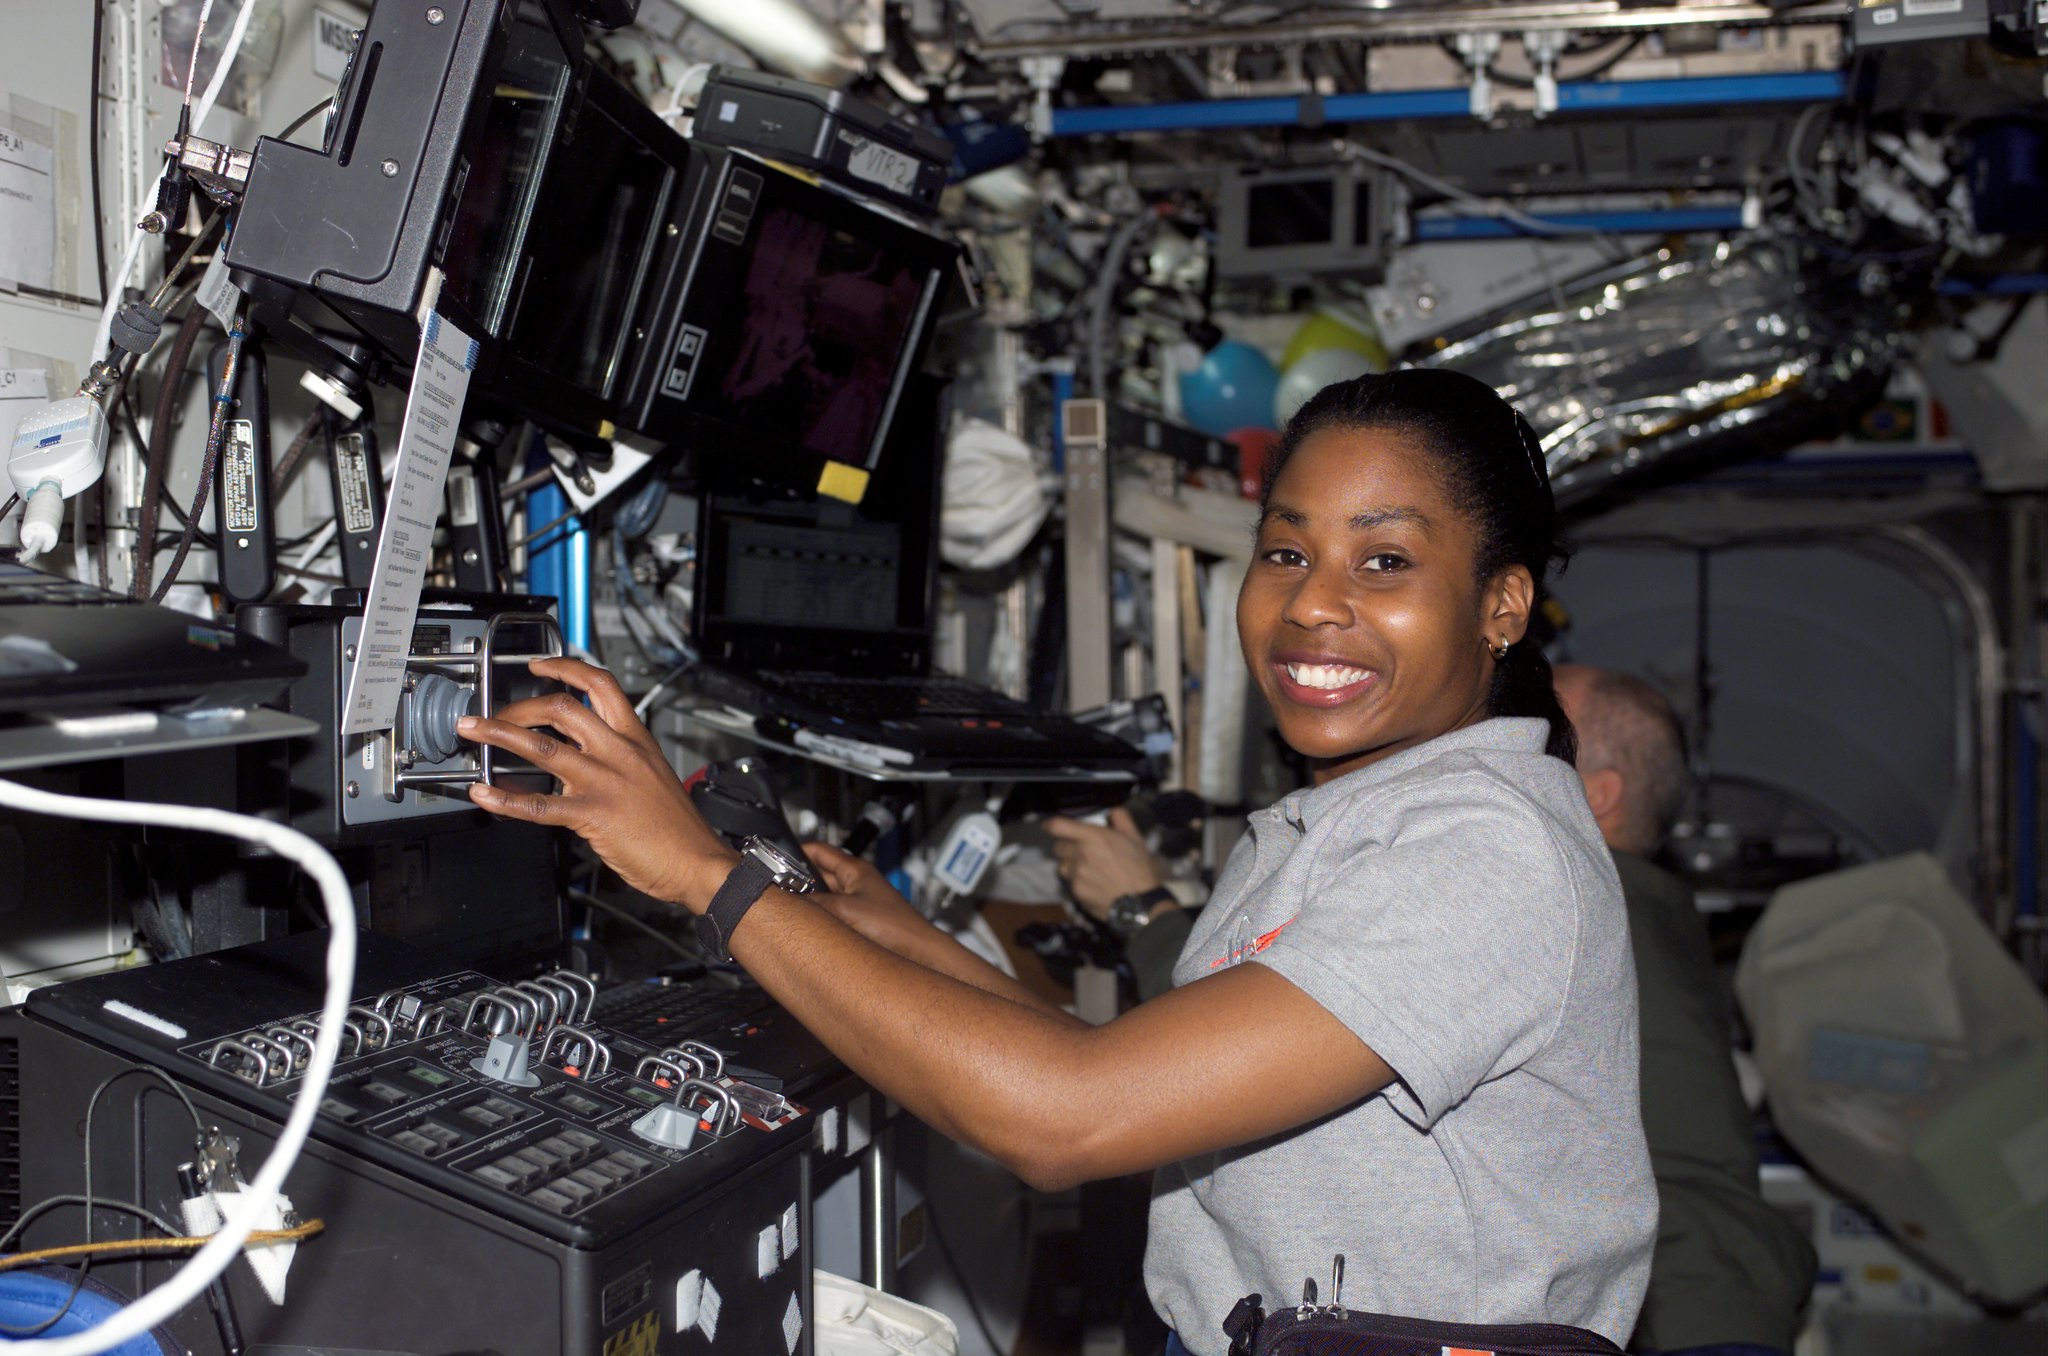 Astronaut Stephanie D. Wilson, STS-121 mission specialist, works with the Mobile Service System (MSS) and Canadarm2 controls in the Destiny laboratory of the International Space Station.